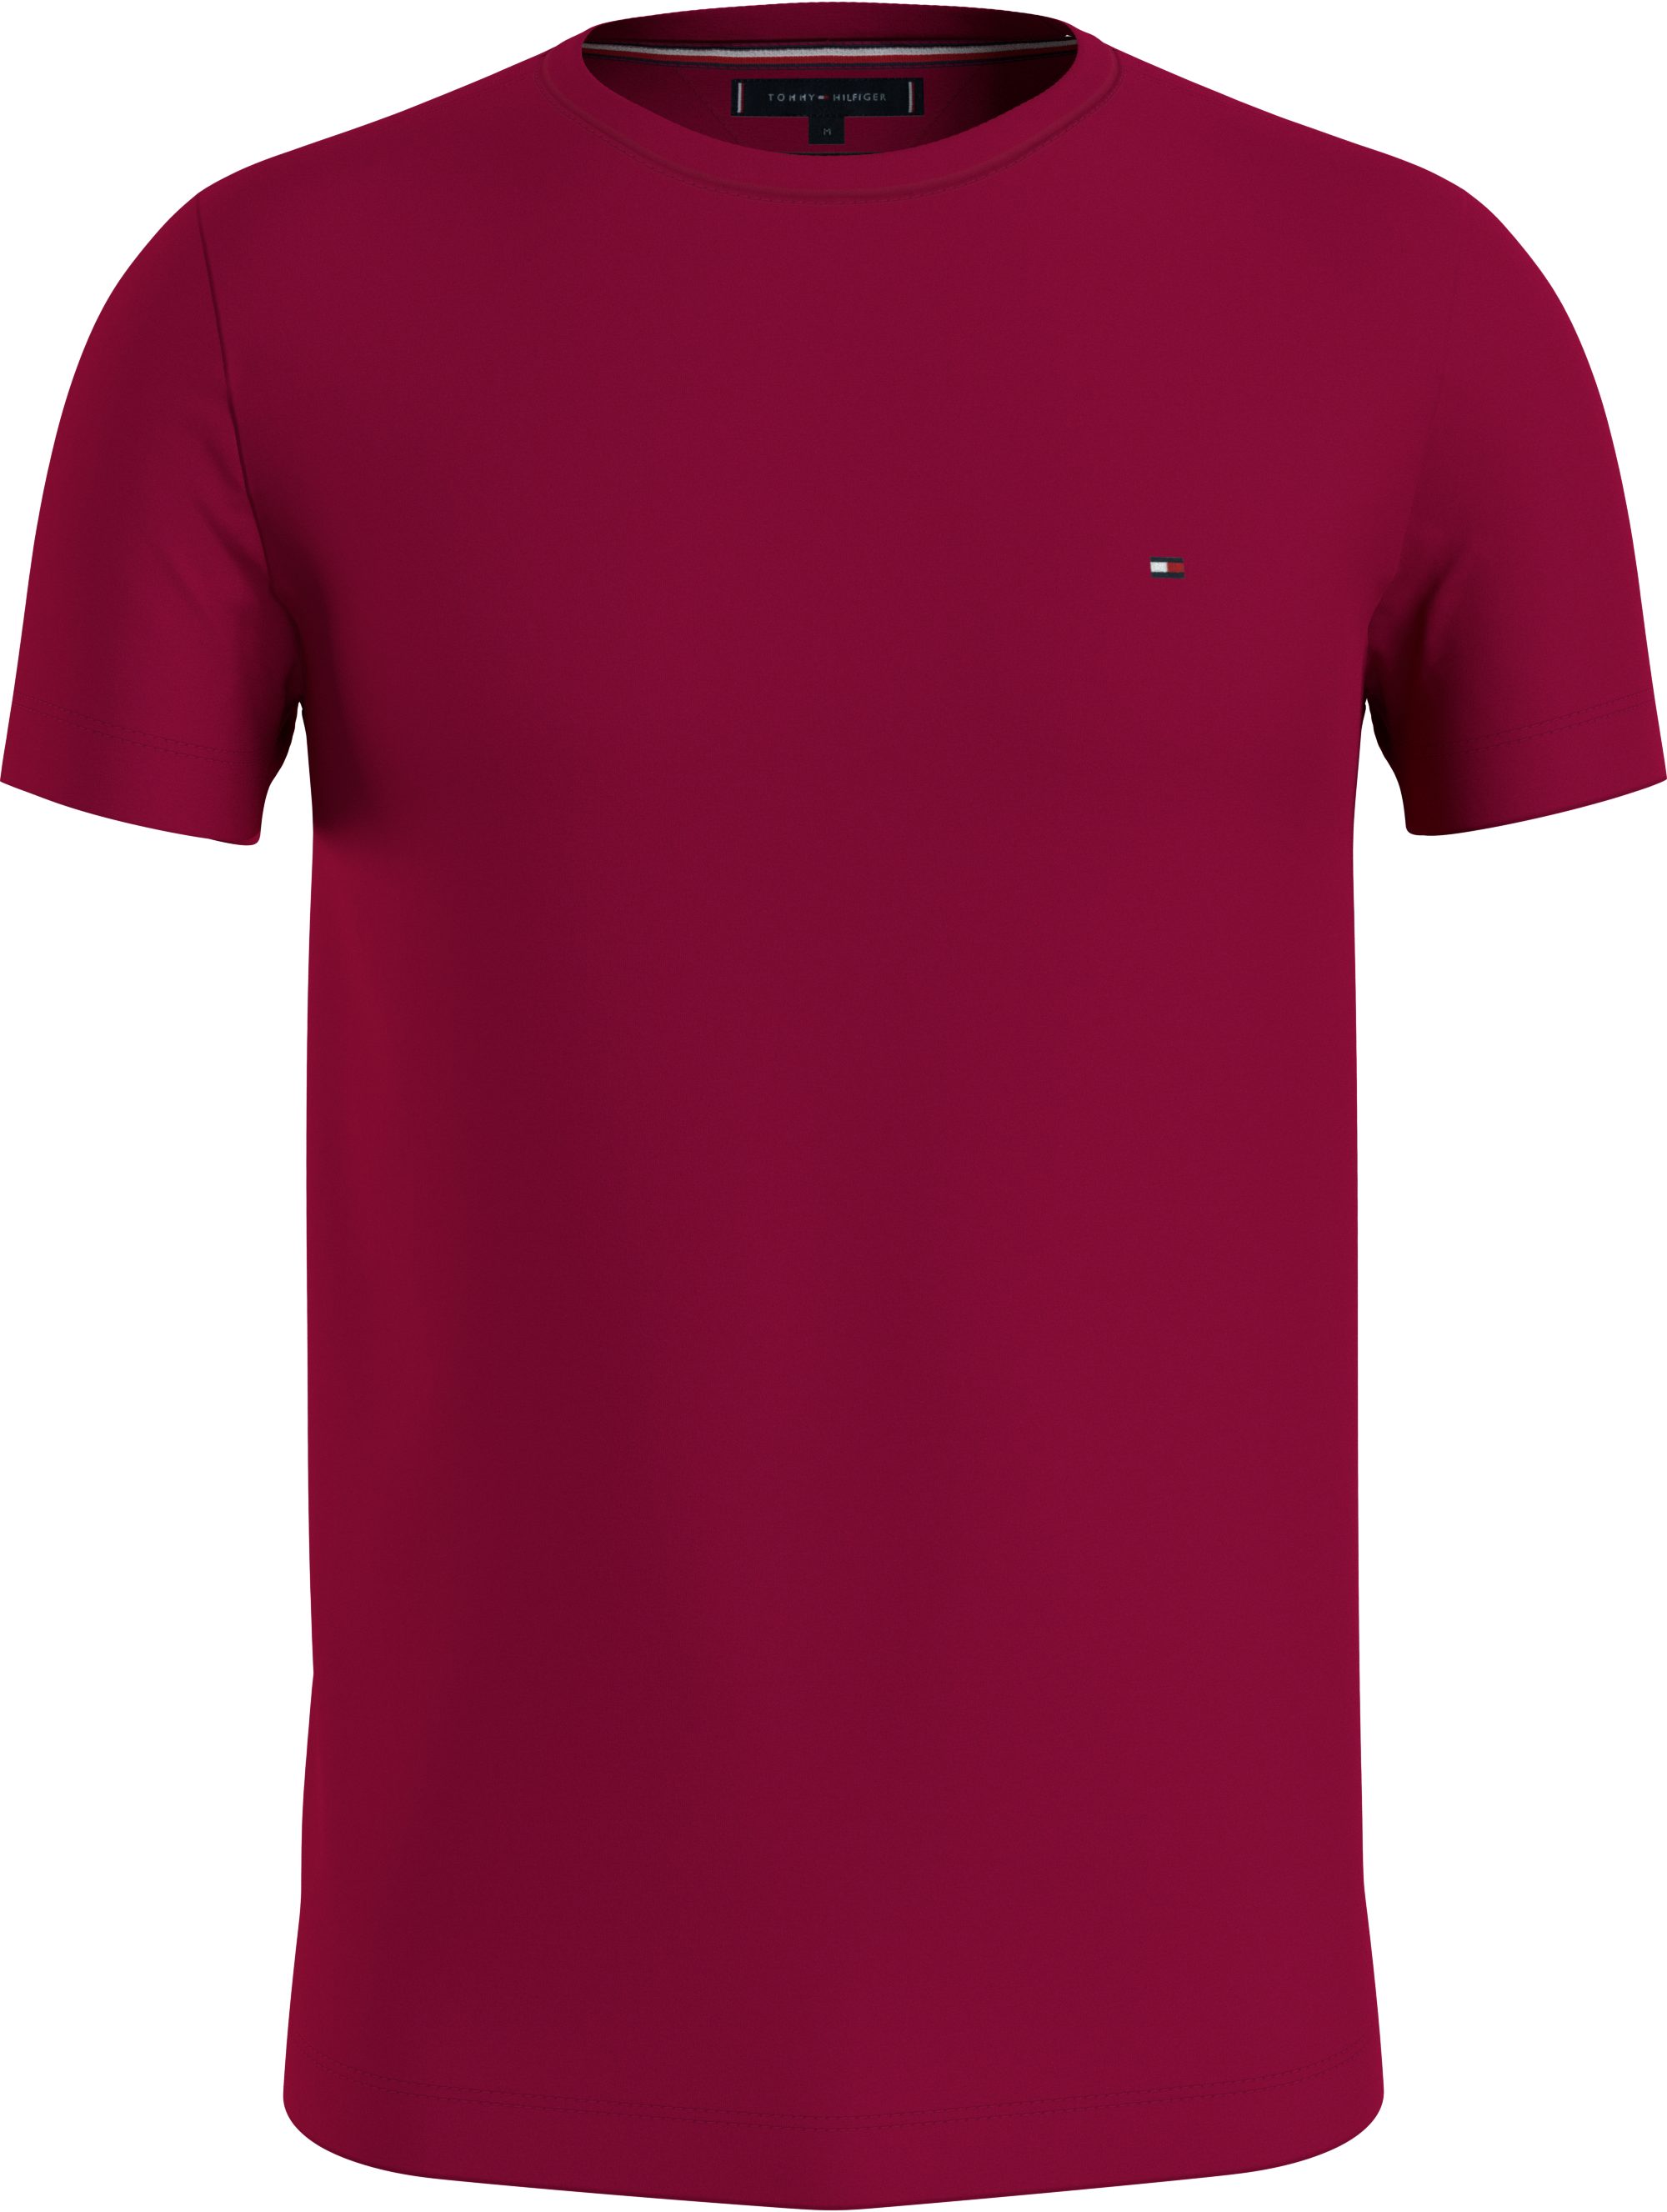 TEE T-Shirt SLIM Tommy STRETCH Hilfiger Royal Berry FIT